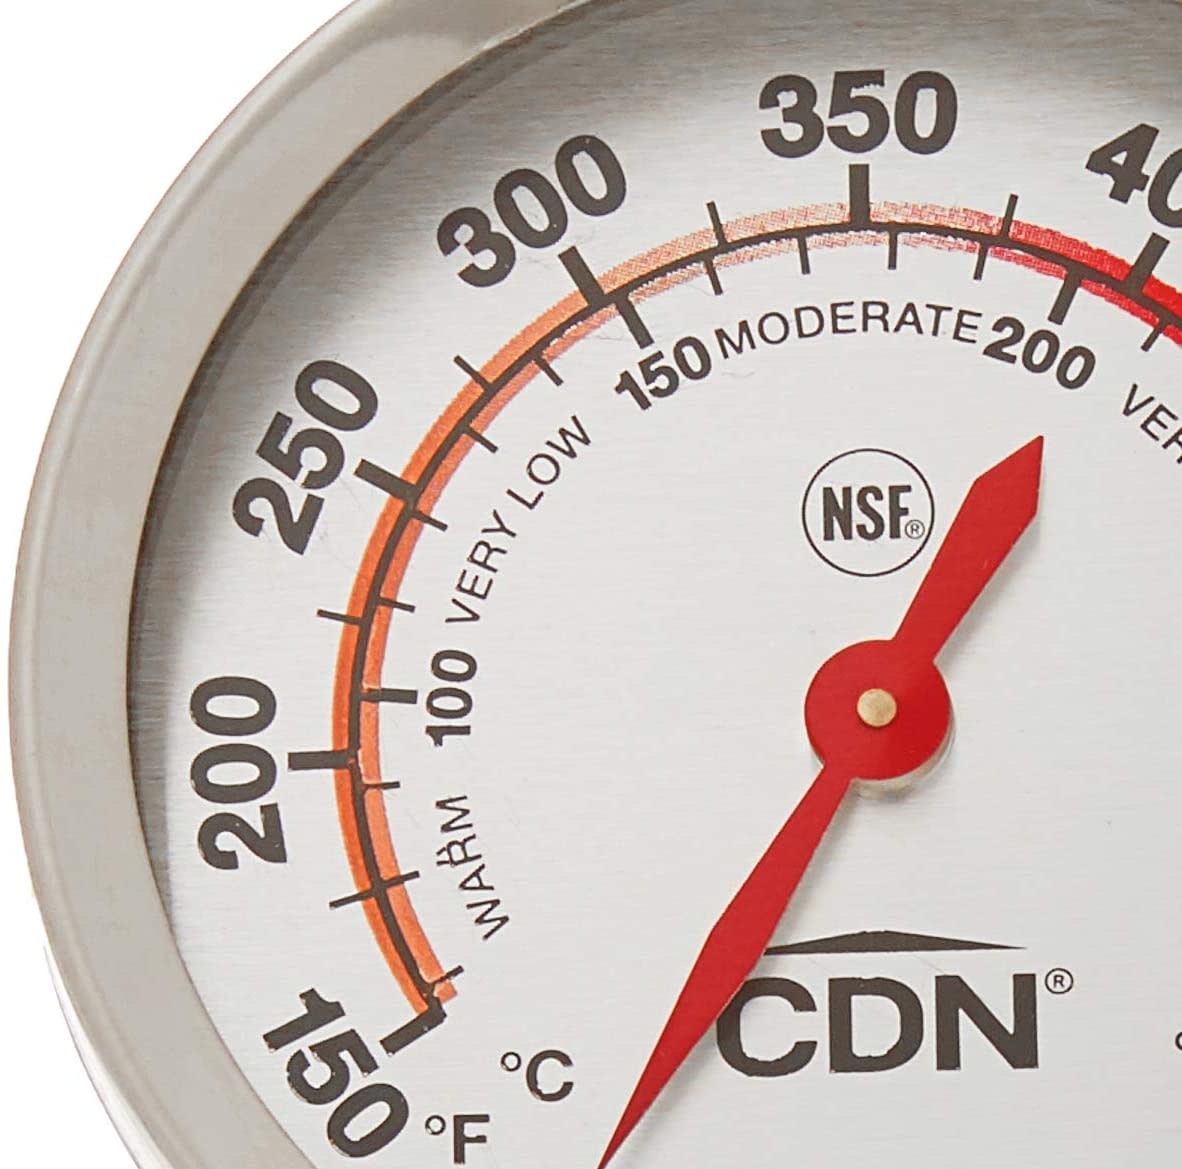  CDN DOT2 ProAccurate Oven Thermometer, The Best Oven Thermometer  for Instant Read in Food Cooking. Stainless Steel For Monitoring Oven  Temperatures. Large Dial. NSF Certified.: Home & Kitchen